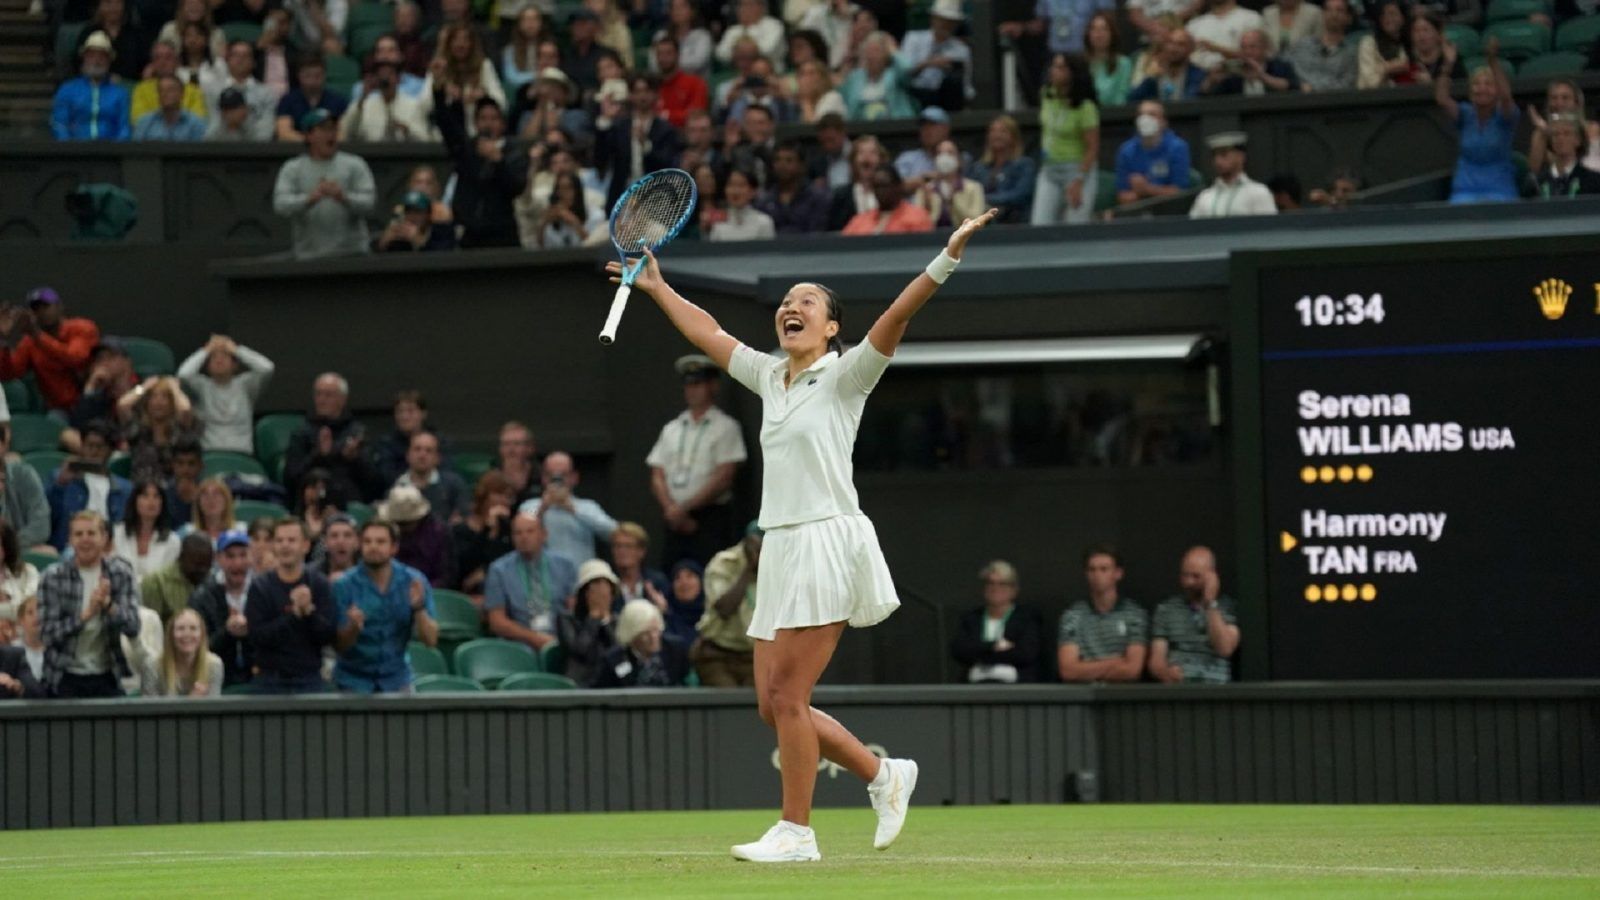 Who is Harmony Tan, the tennis player who knocked Serena Williams out of Wimbledon 2022?